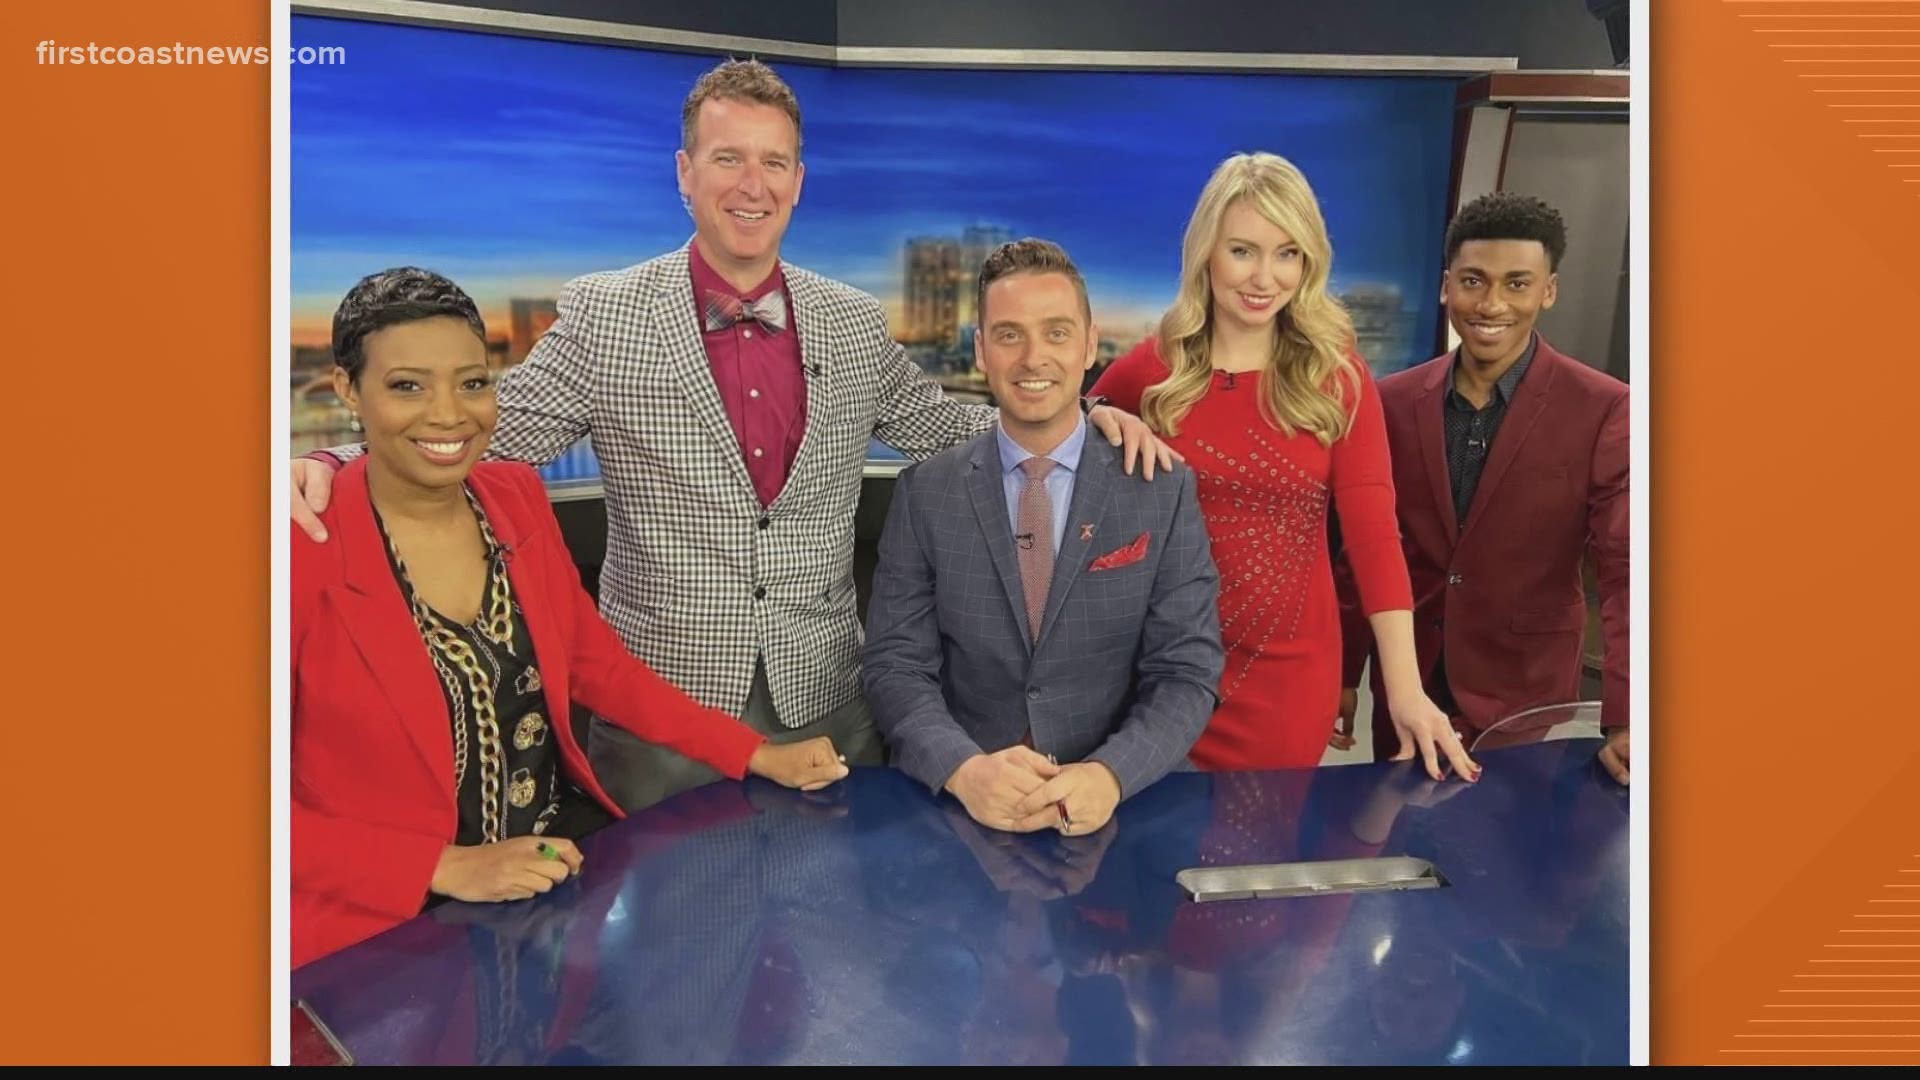 Meteorologist Mike Prangley is moving to First Coast Living! Starting Monday, Meteorologist Lauren Rautenkranz will be joining GMJ.